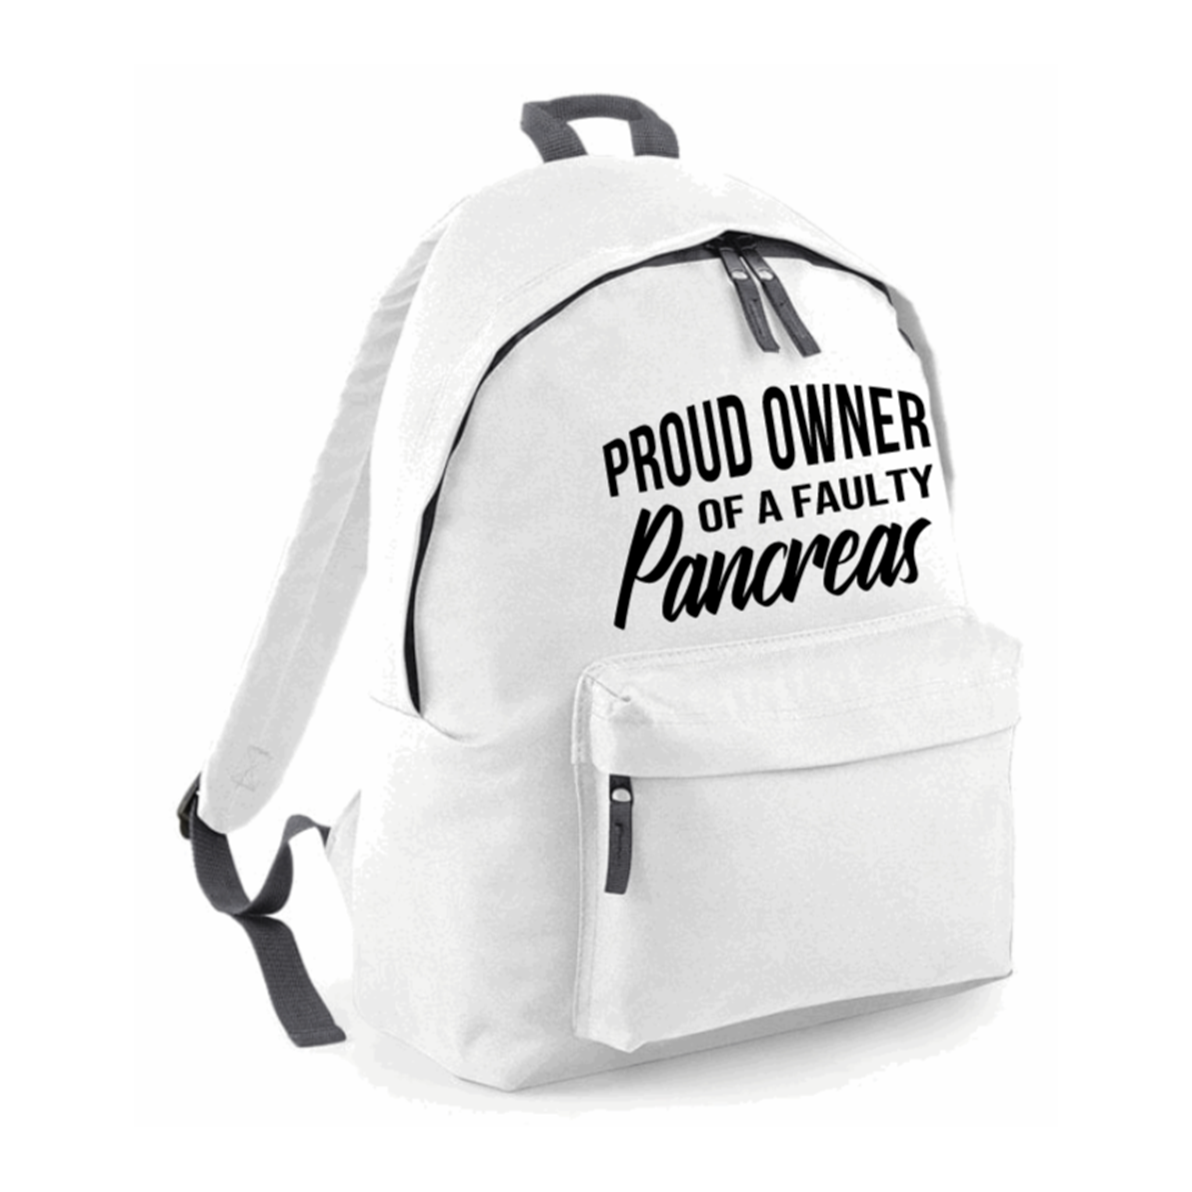 Proud Owner Of A Faulty Pancreas Backpack